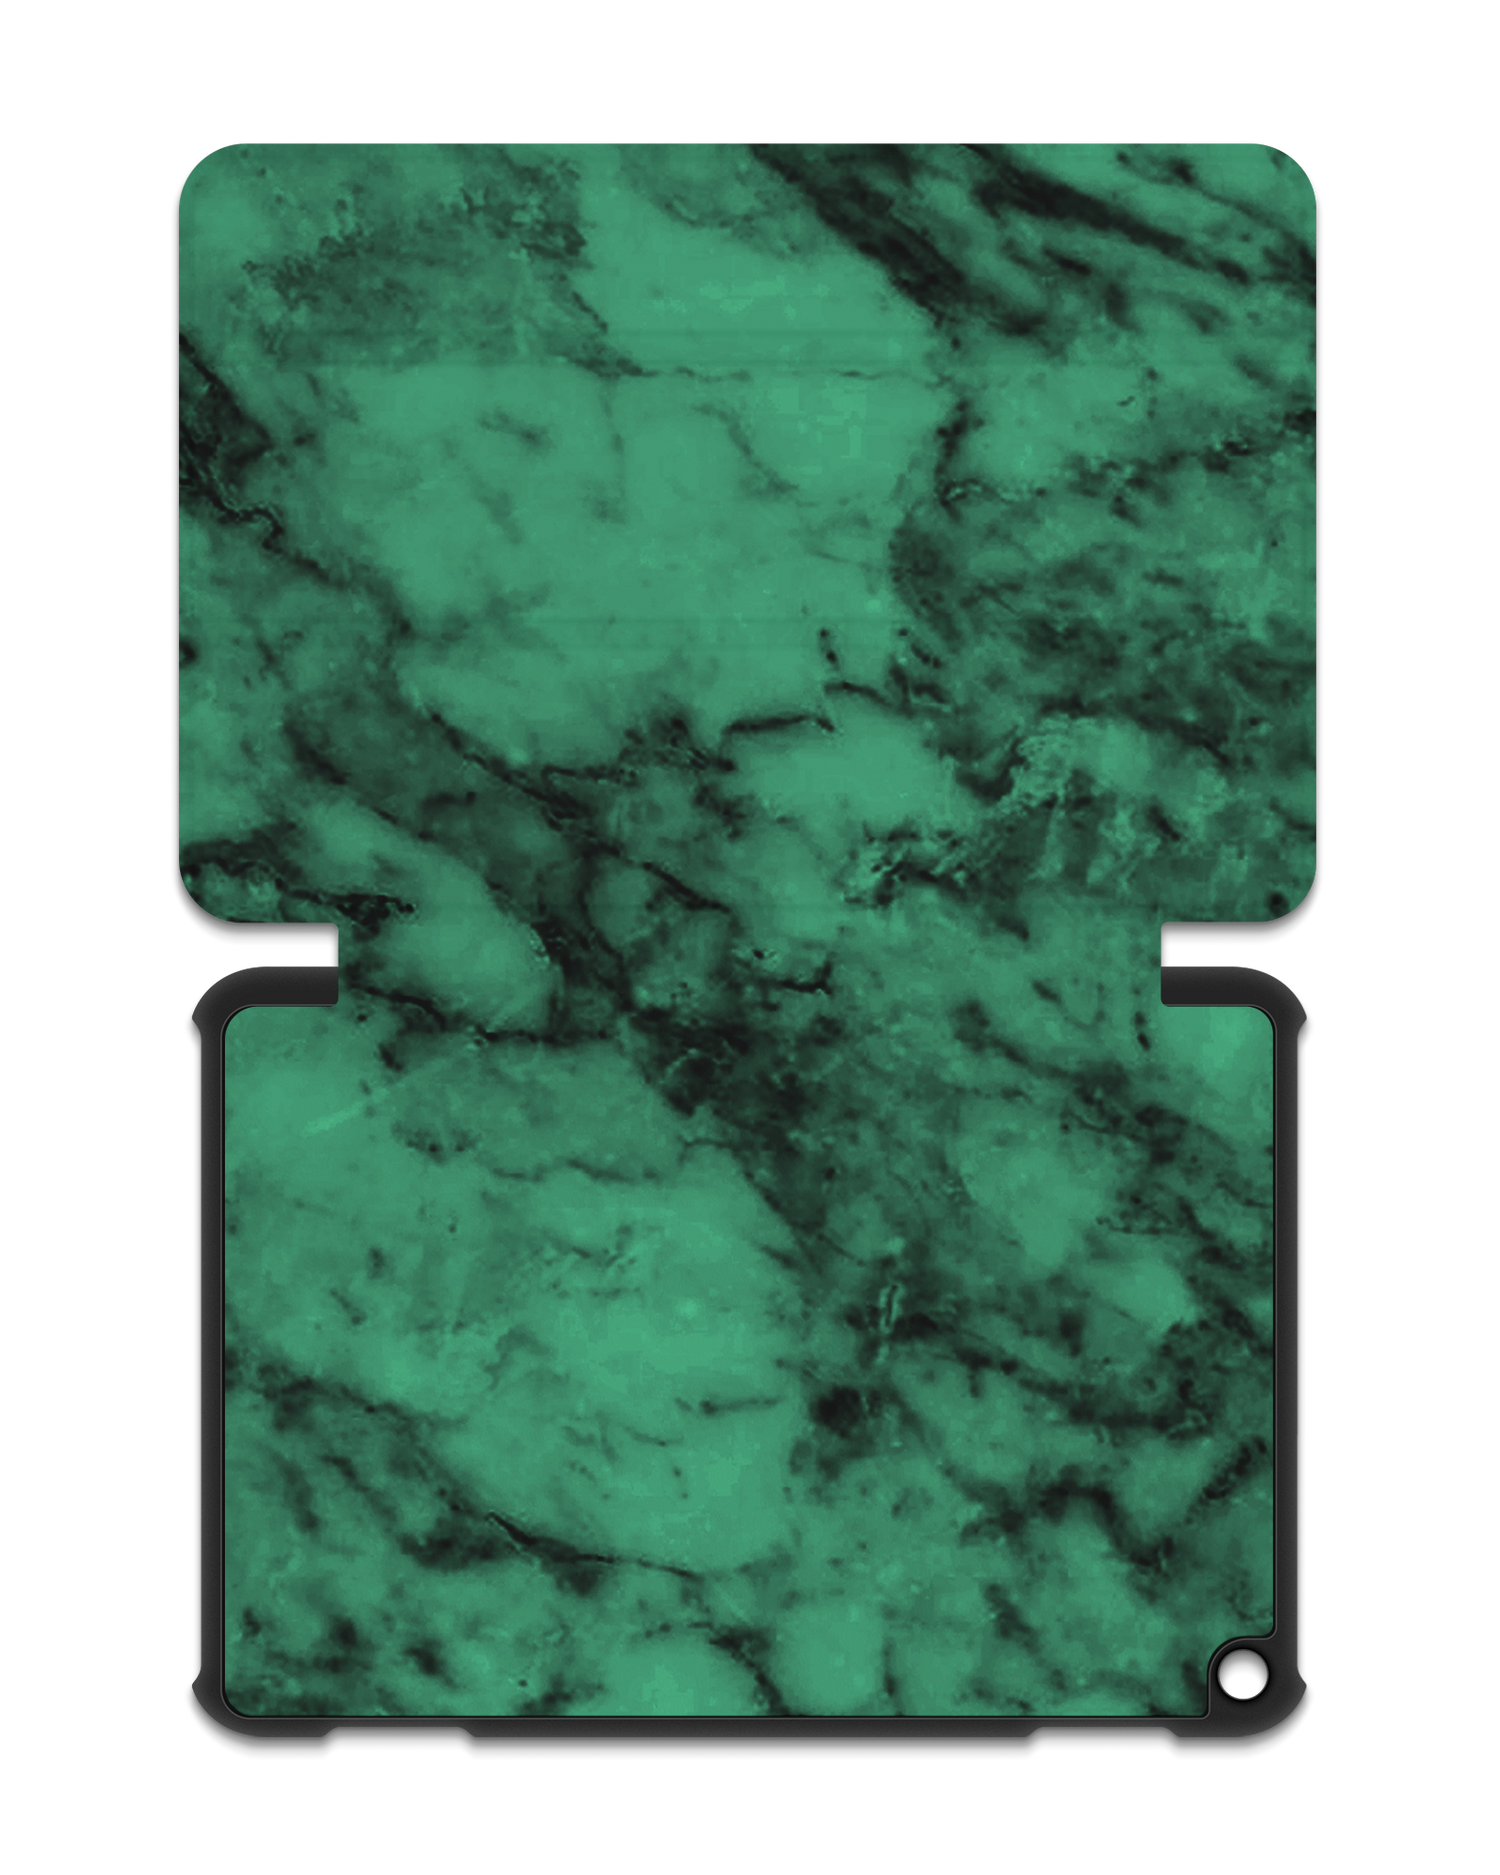 Green Marble Tablet Smart Case for Amazon Fire HD 8 (2022), Amazon Fire HD 8 Plus (2022), Amazon Fire HD 8 (2020), Amazon Fire HD 8 Plus (2020): Opened